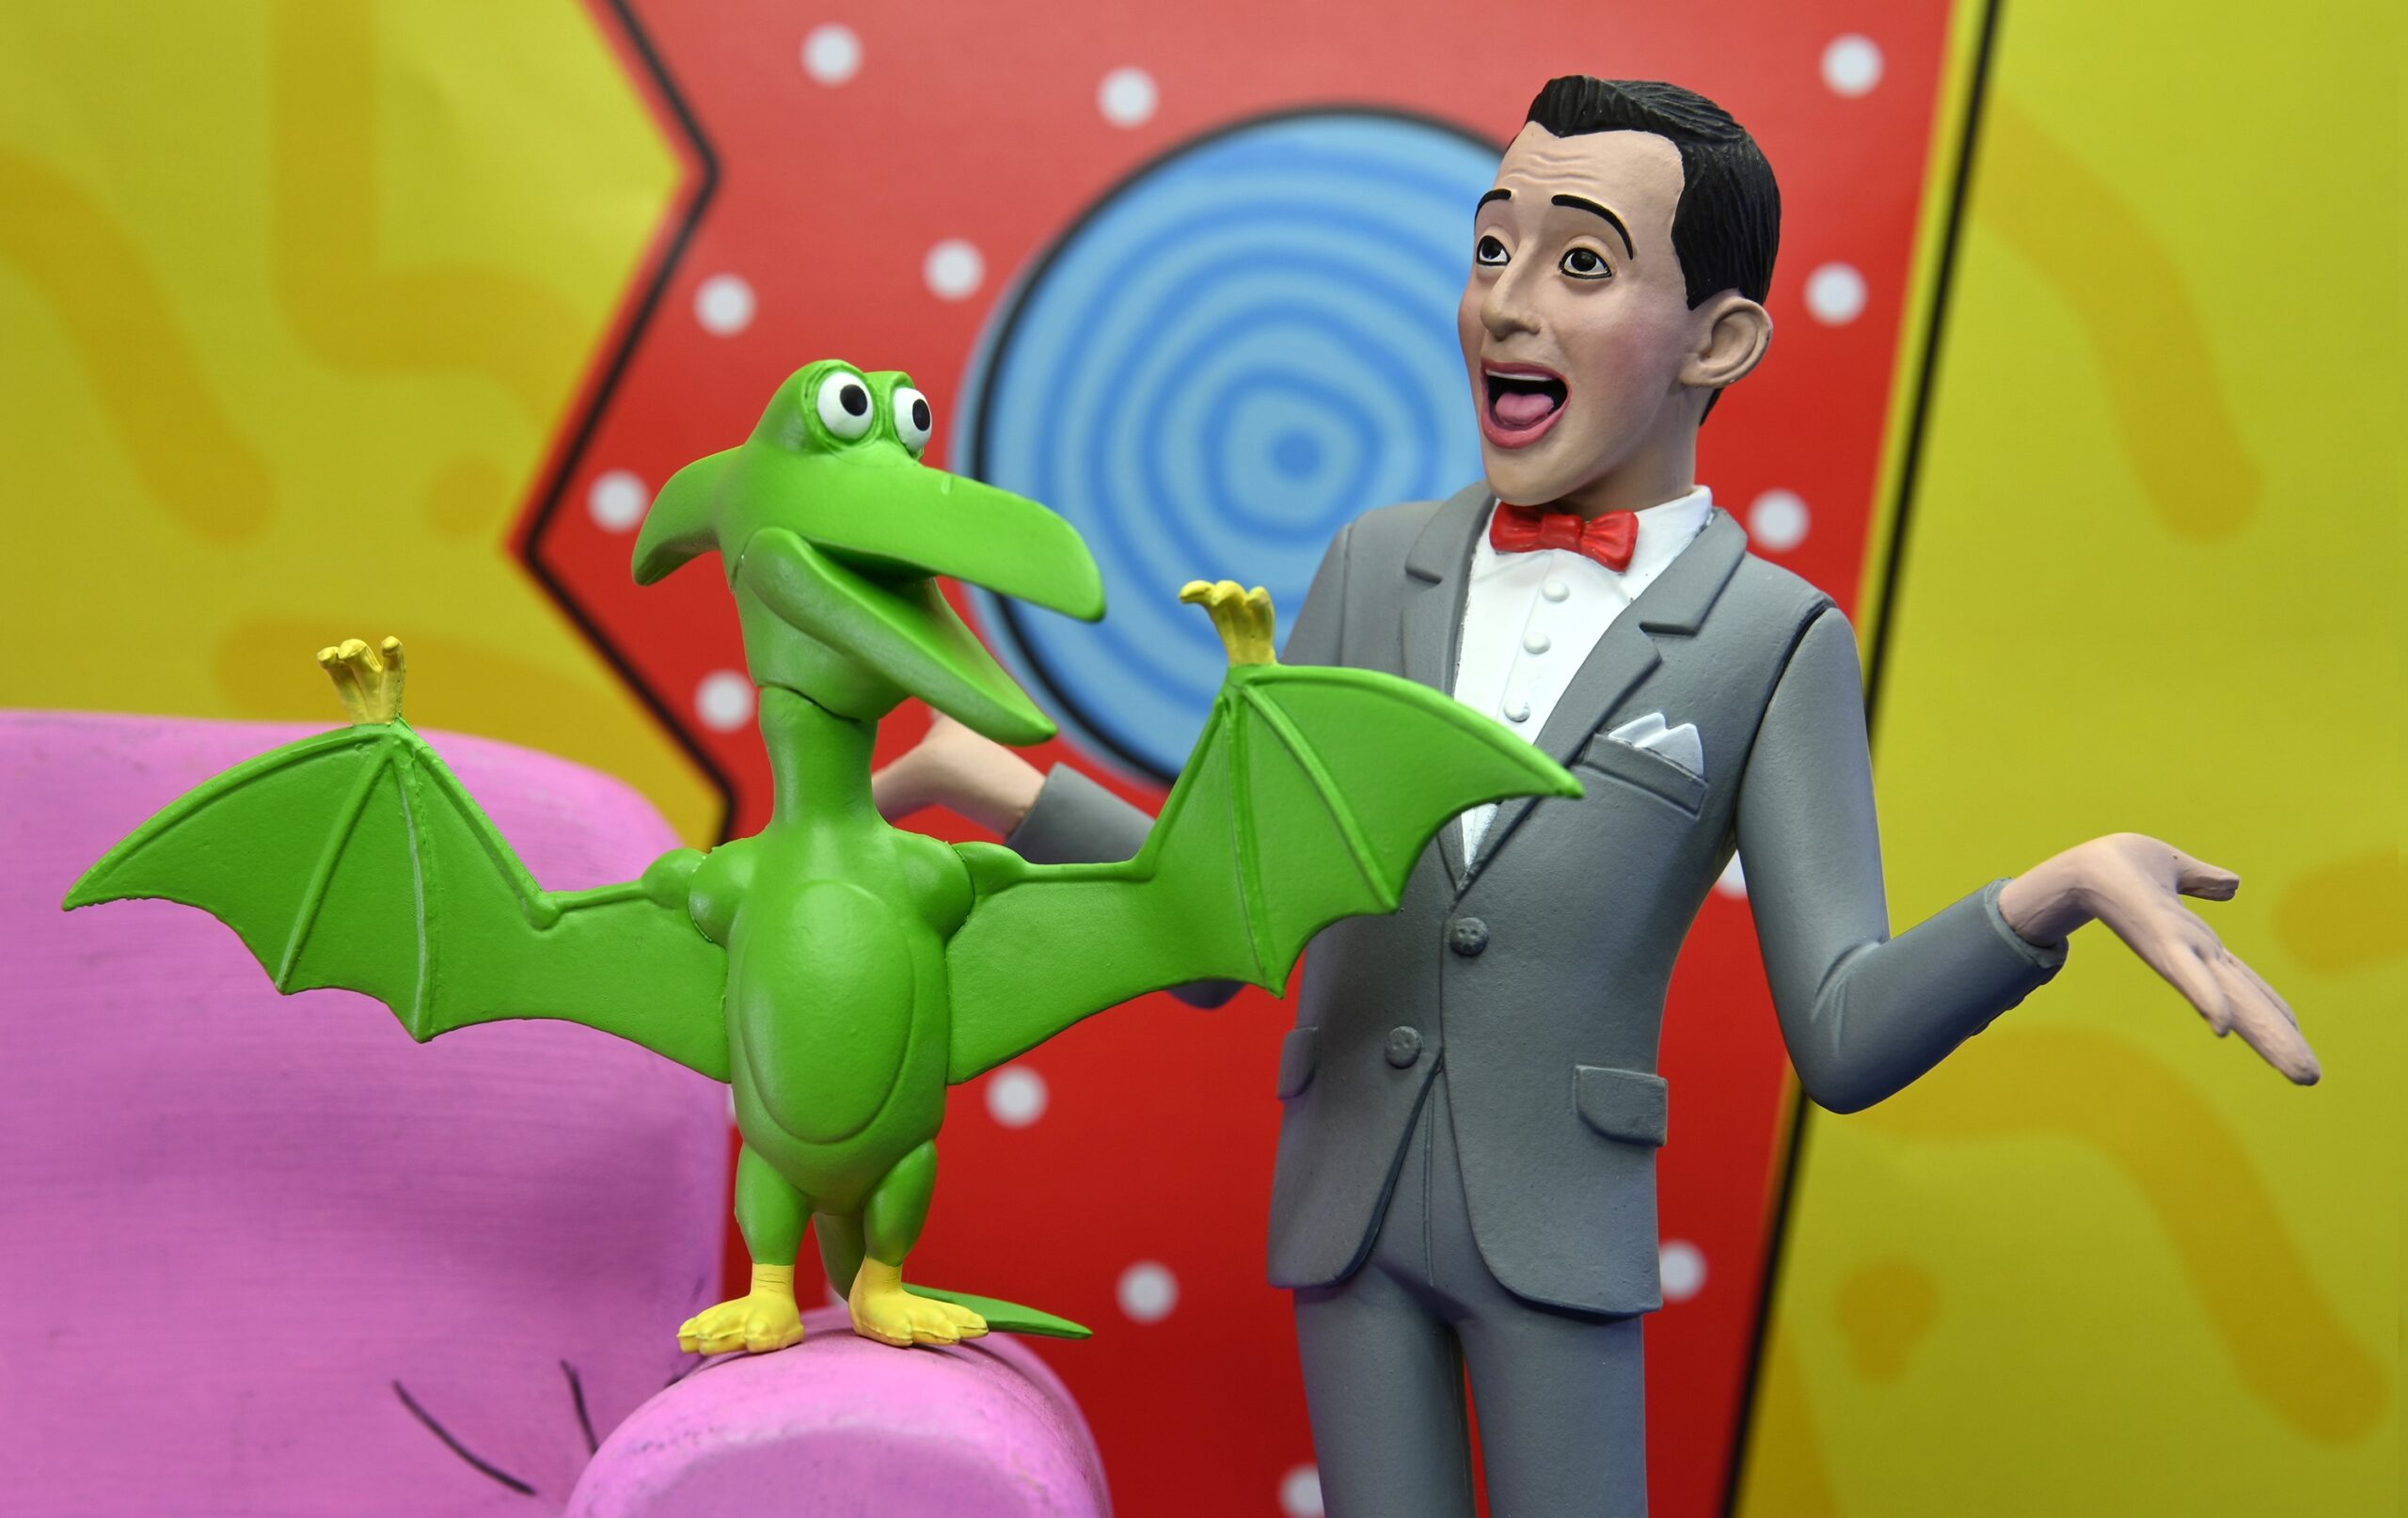 NECAOnline.com | Pee-Wee's Playhouse - 6" Scale Action Figure - Pee-wee and Pterri